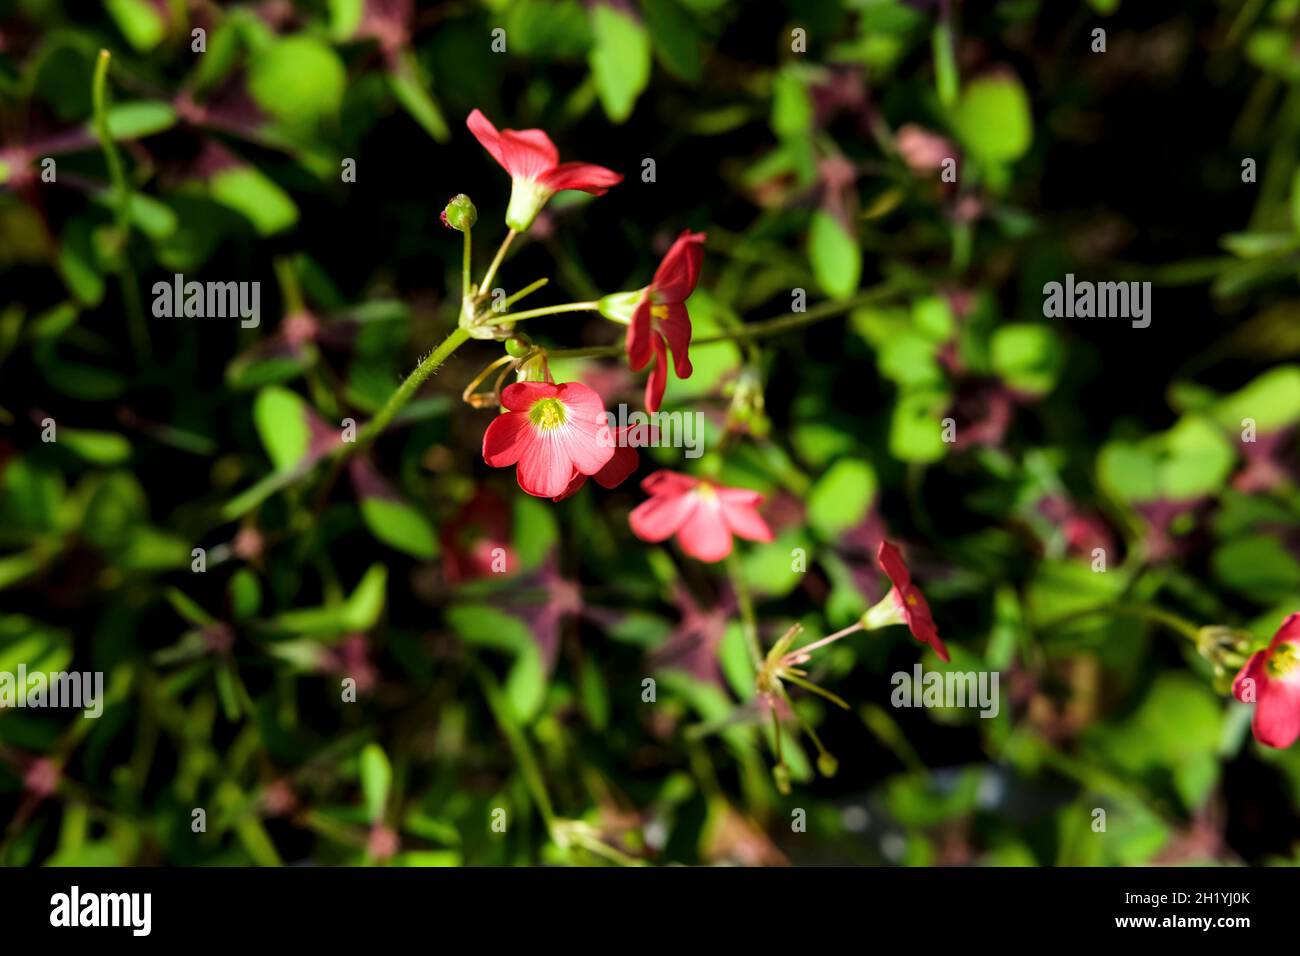 The herb and edible flower oxalis growing Stock Photo